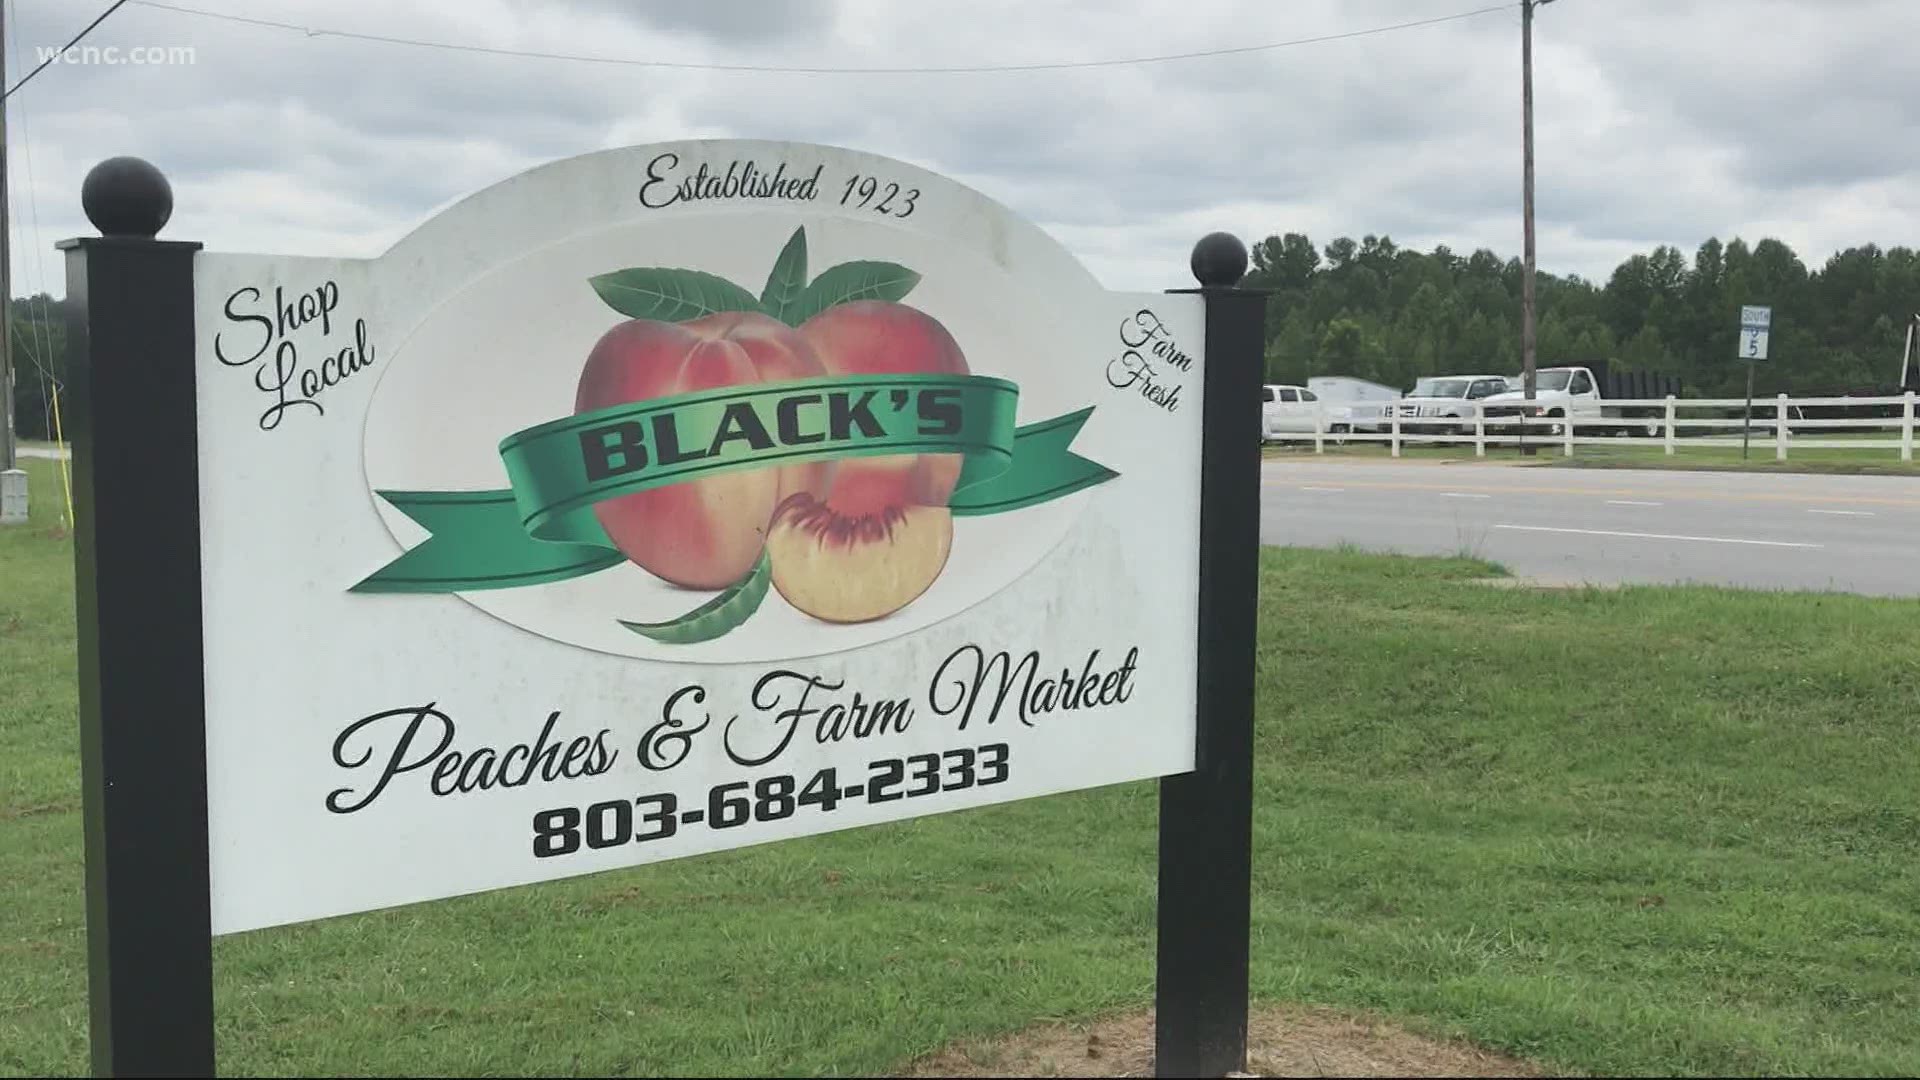 Black's Farm can't take the fruit back, but do hope the people responsible will pay for the peaches taken.